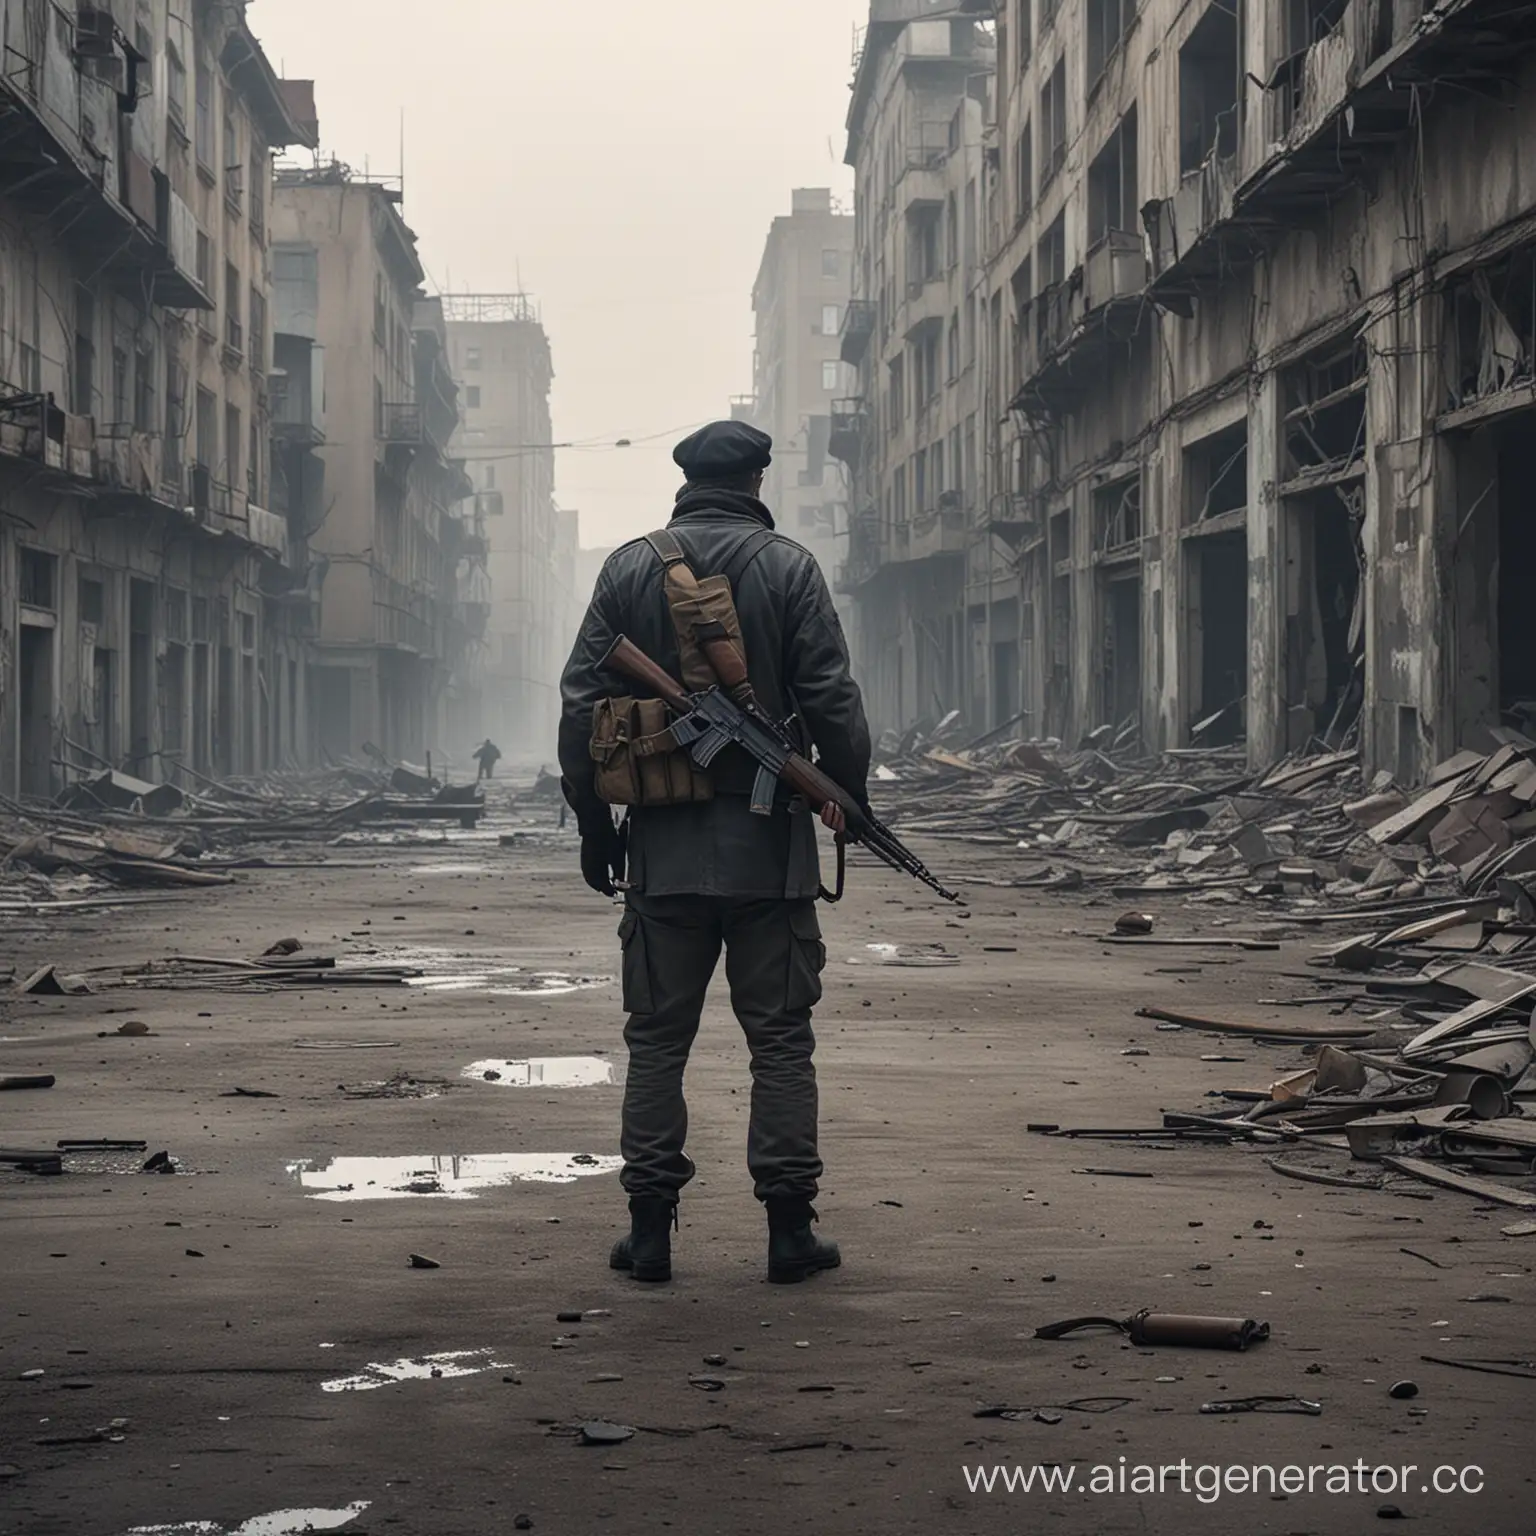 Man-with-Rifle-Standing-in-Abandoned-City